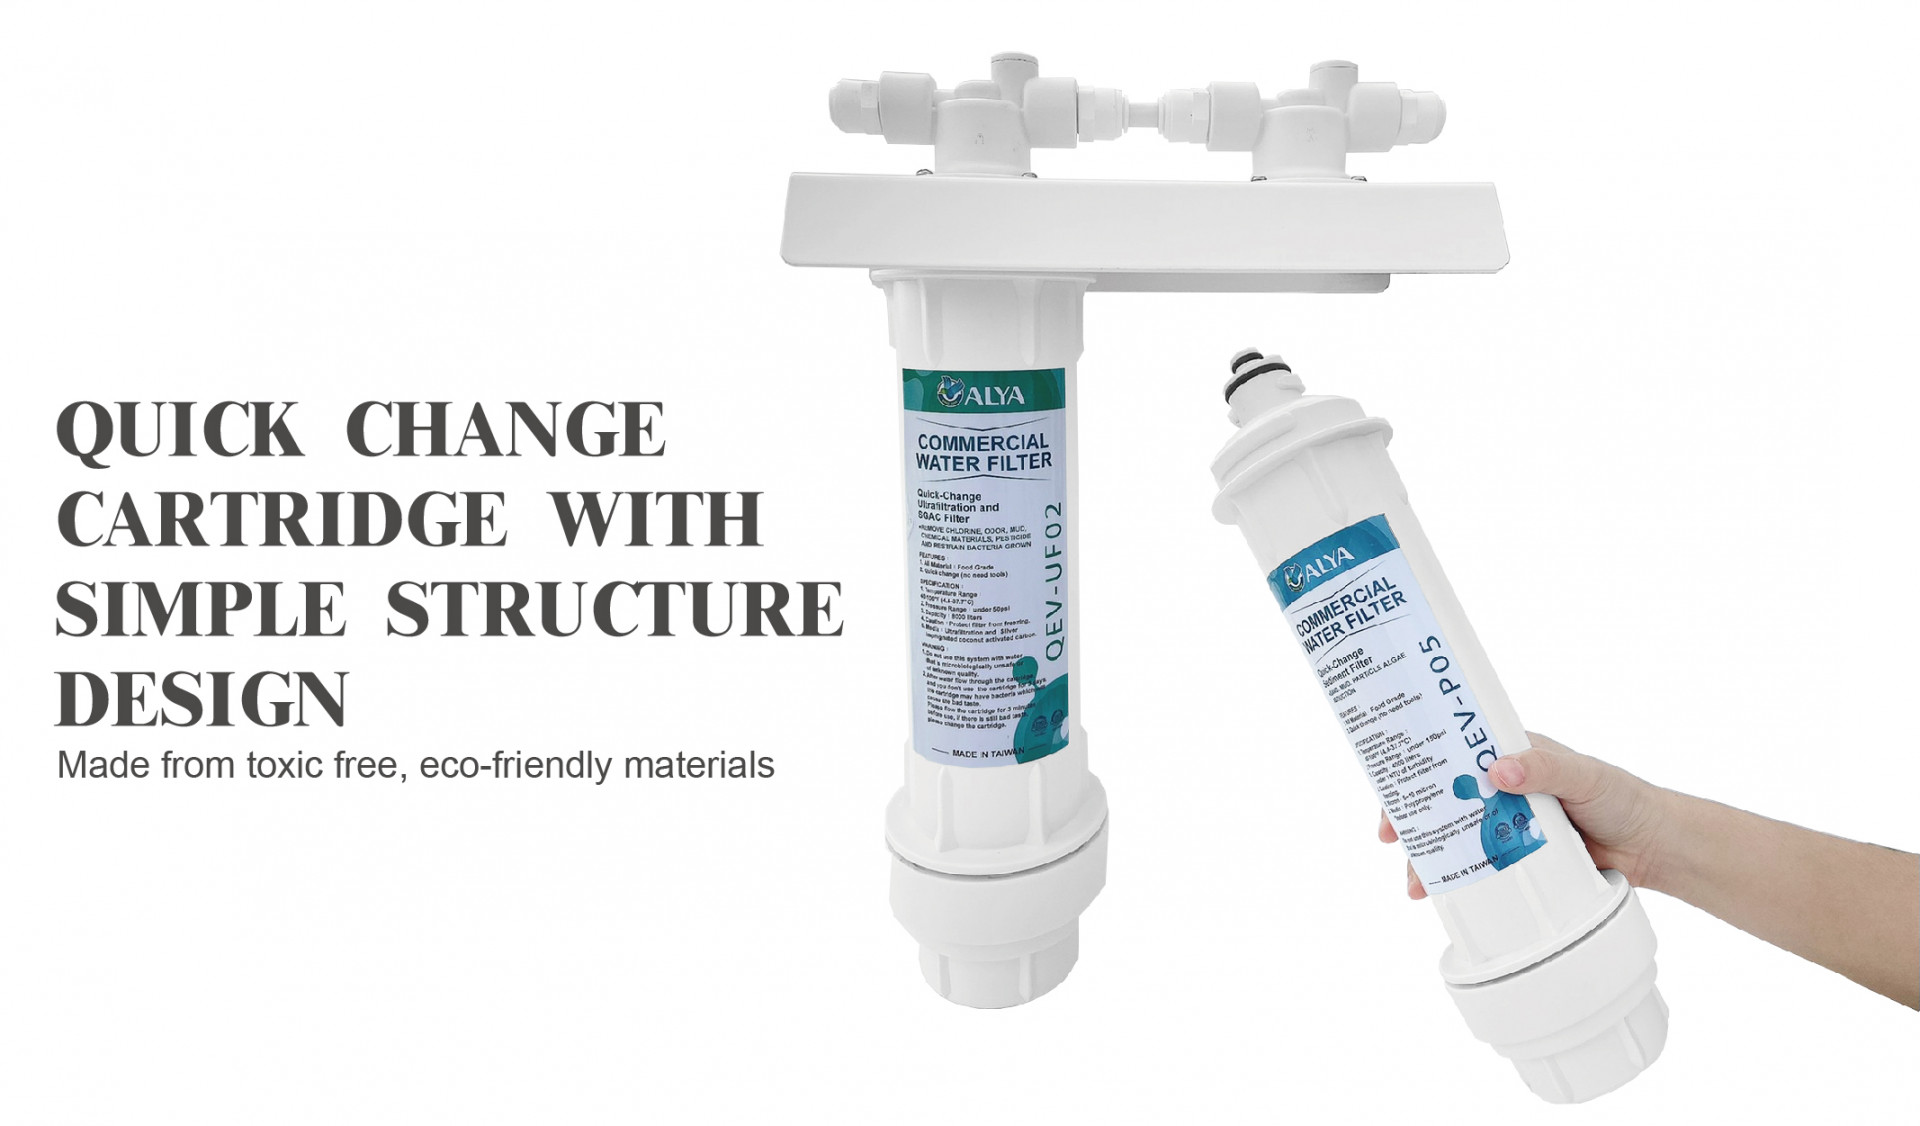 HOUSING QUICK CHANGE CARTRIDGE WITH SIMPLE STRUCTURE DESIGN